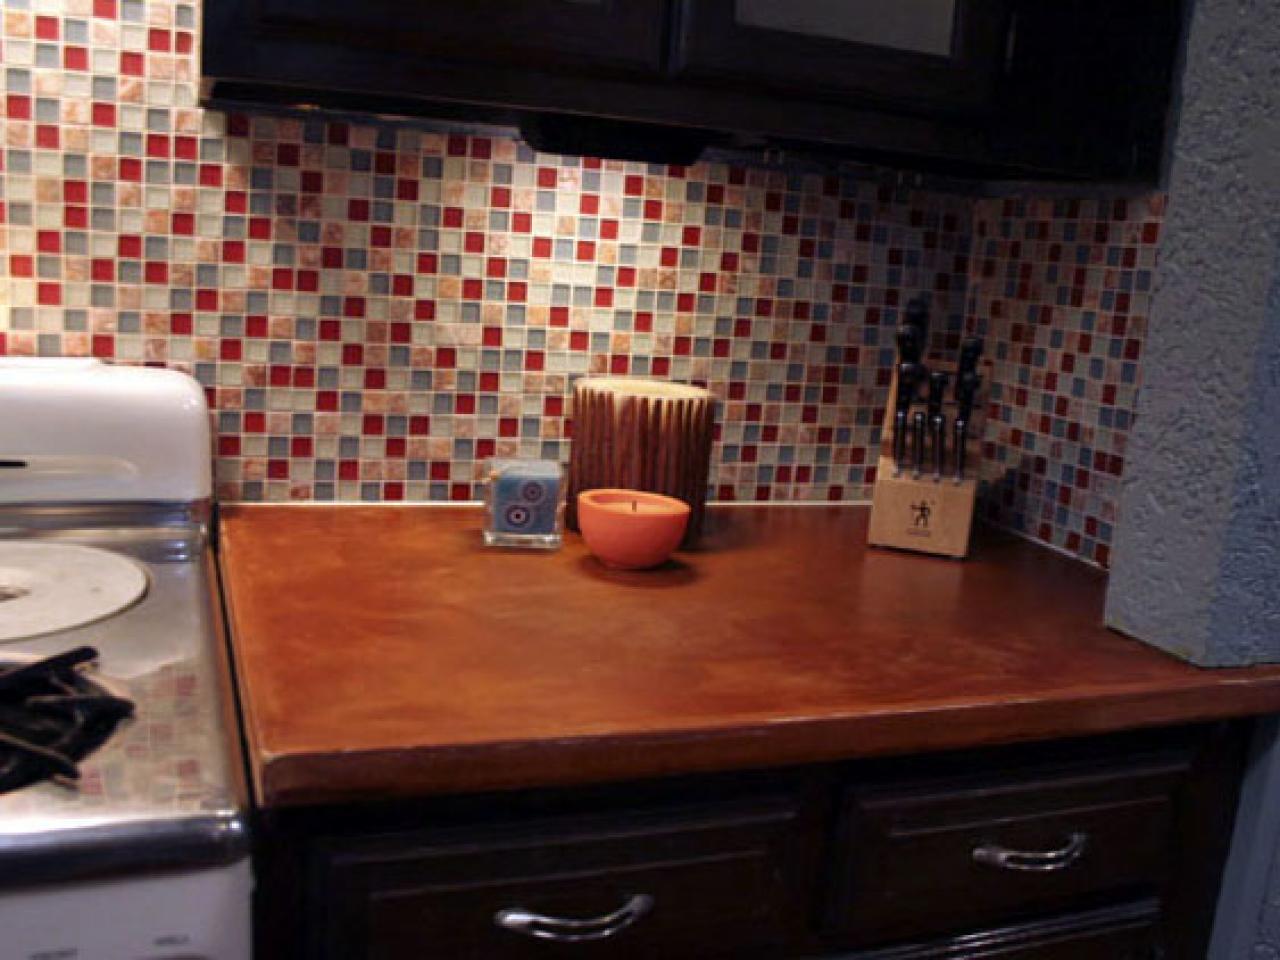 Tile Backsplash In Your Kitchen, How To Install Tile Backsplash In Kitchen